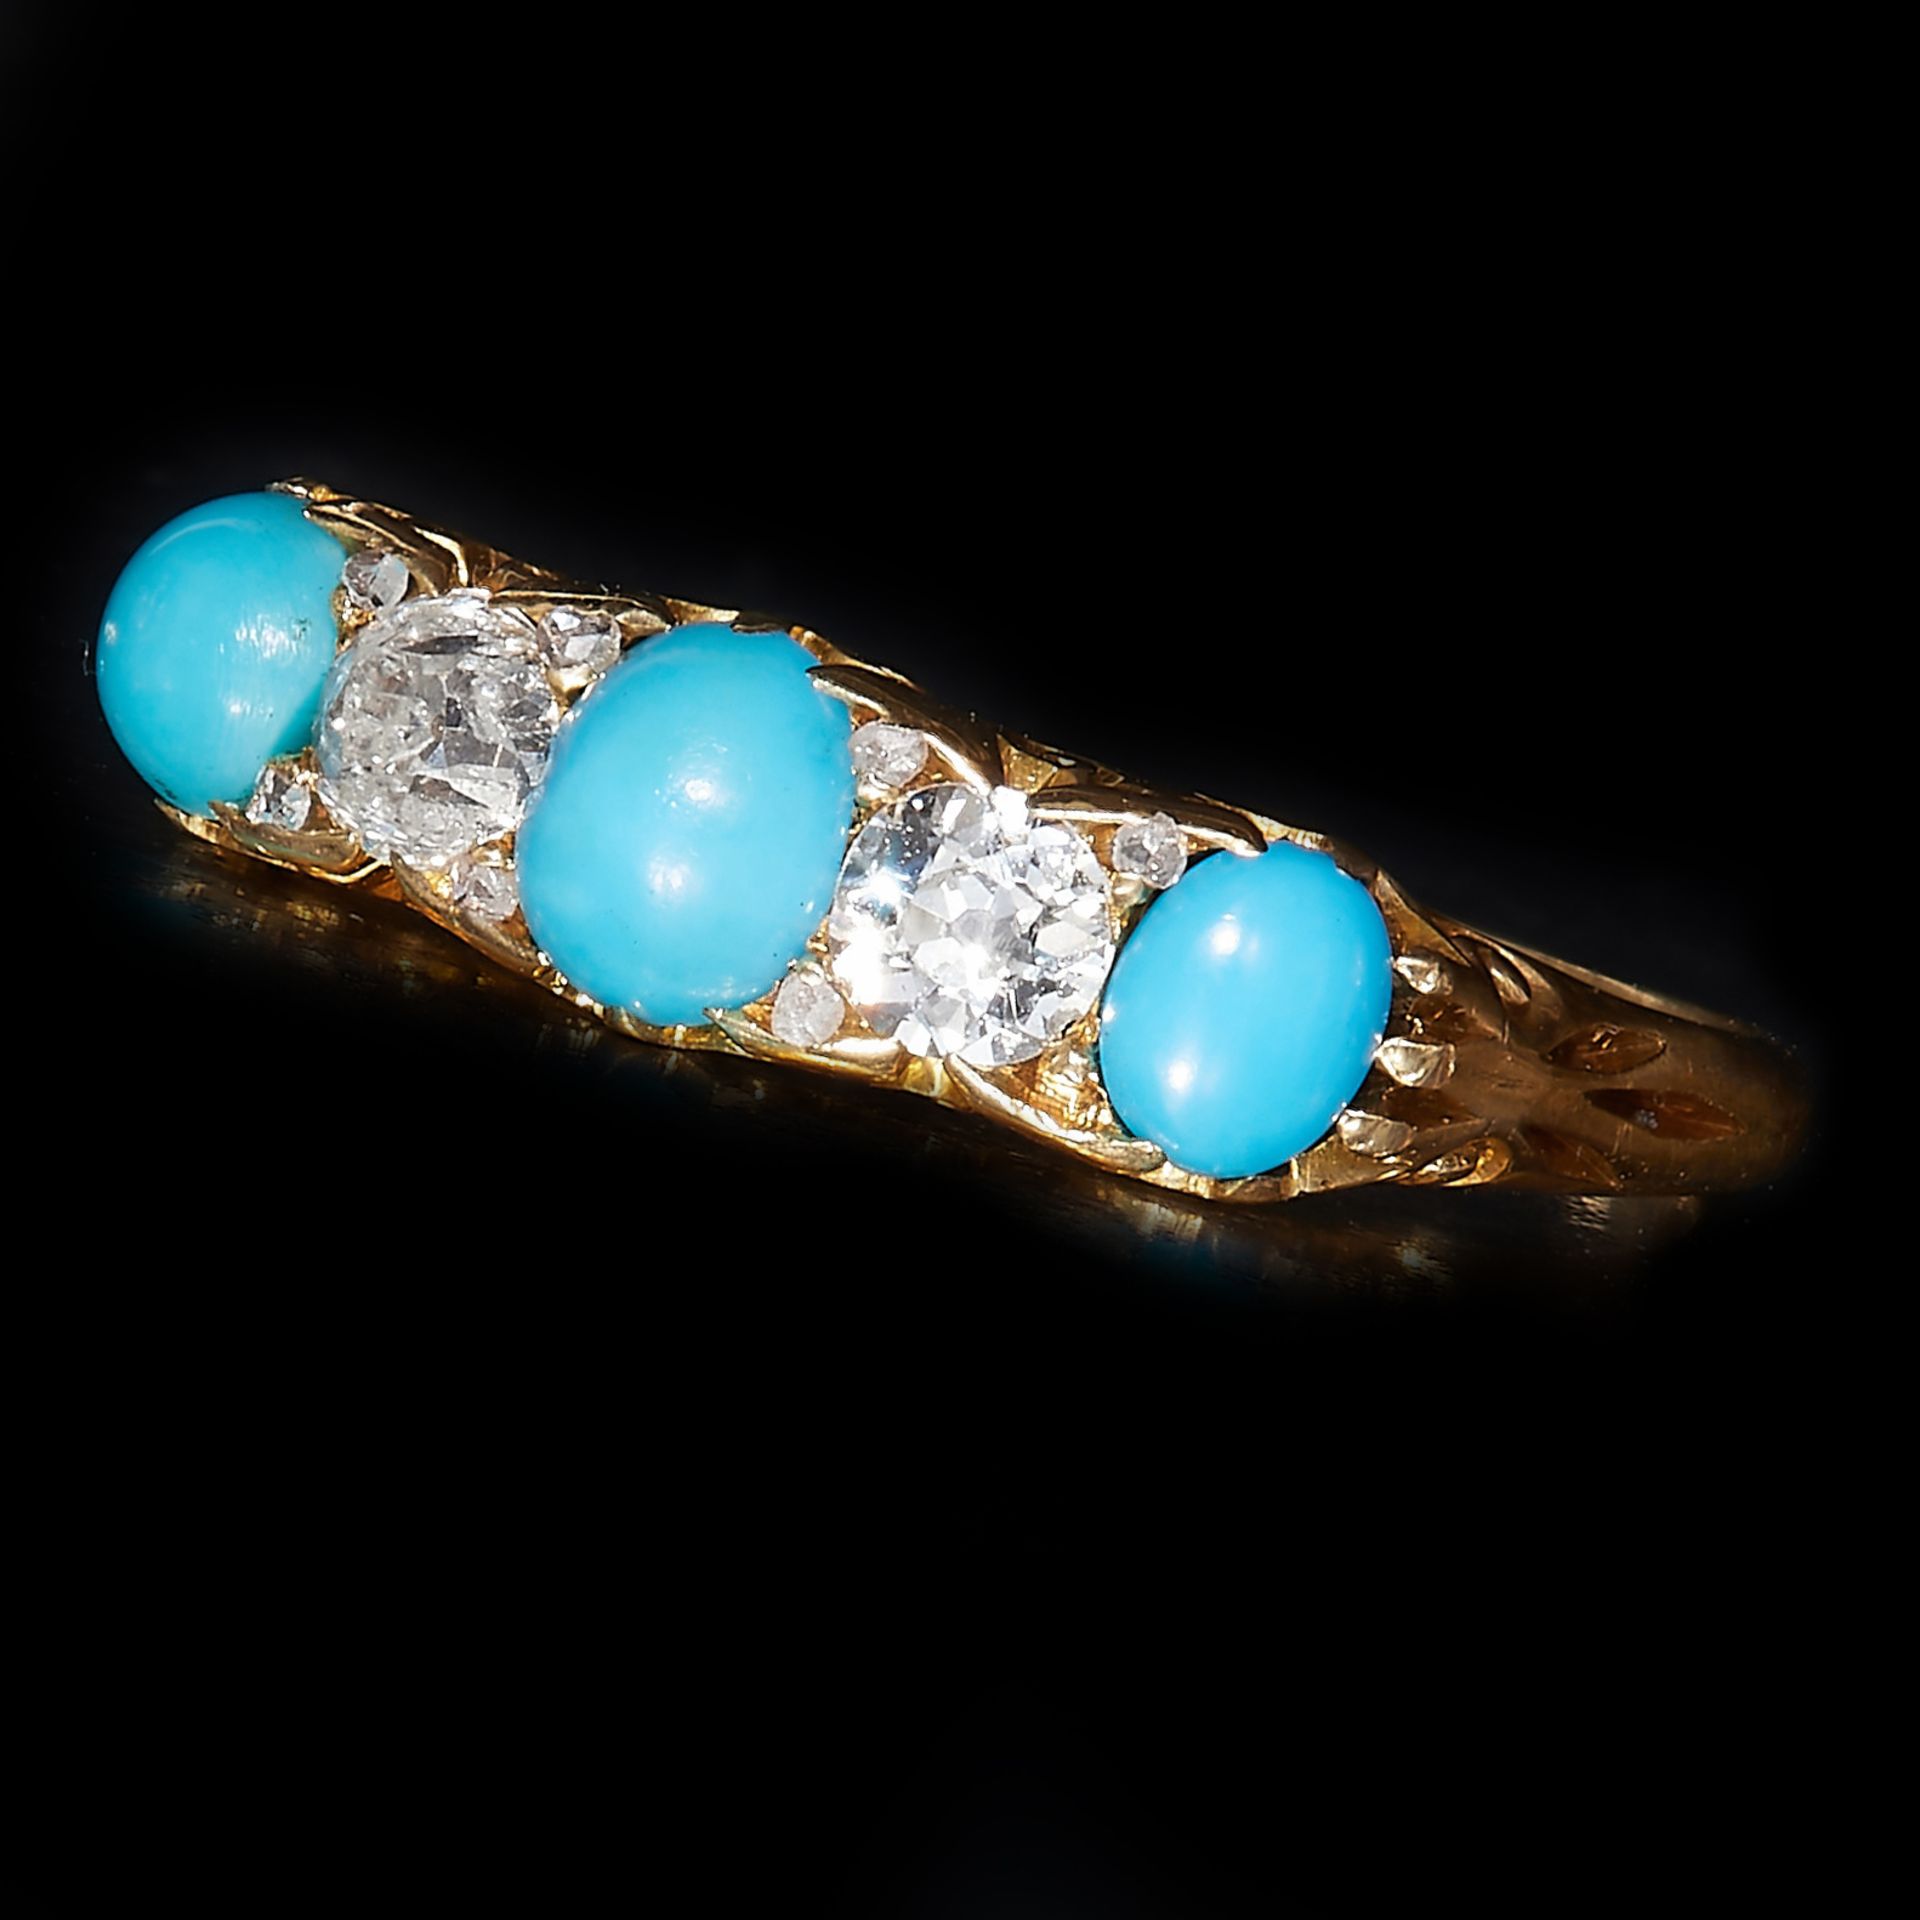 ANTIQUE TURQUOISE AND DIAMOND 5-STONE RING